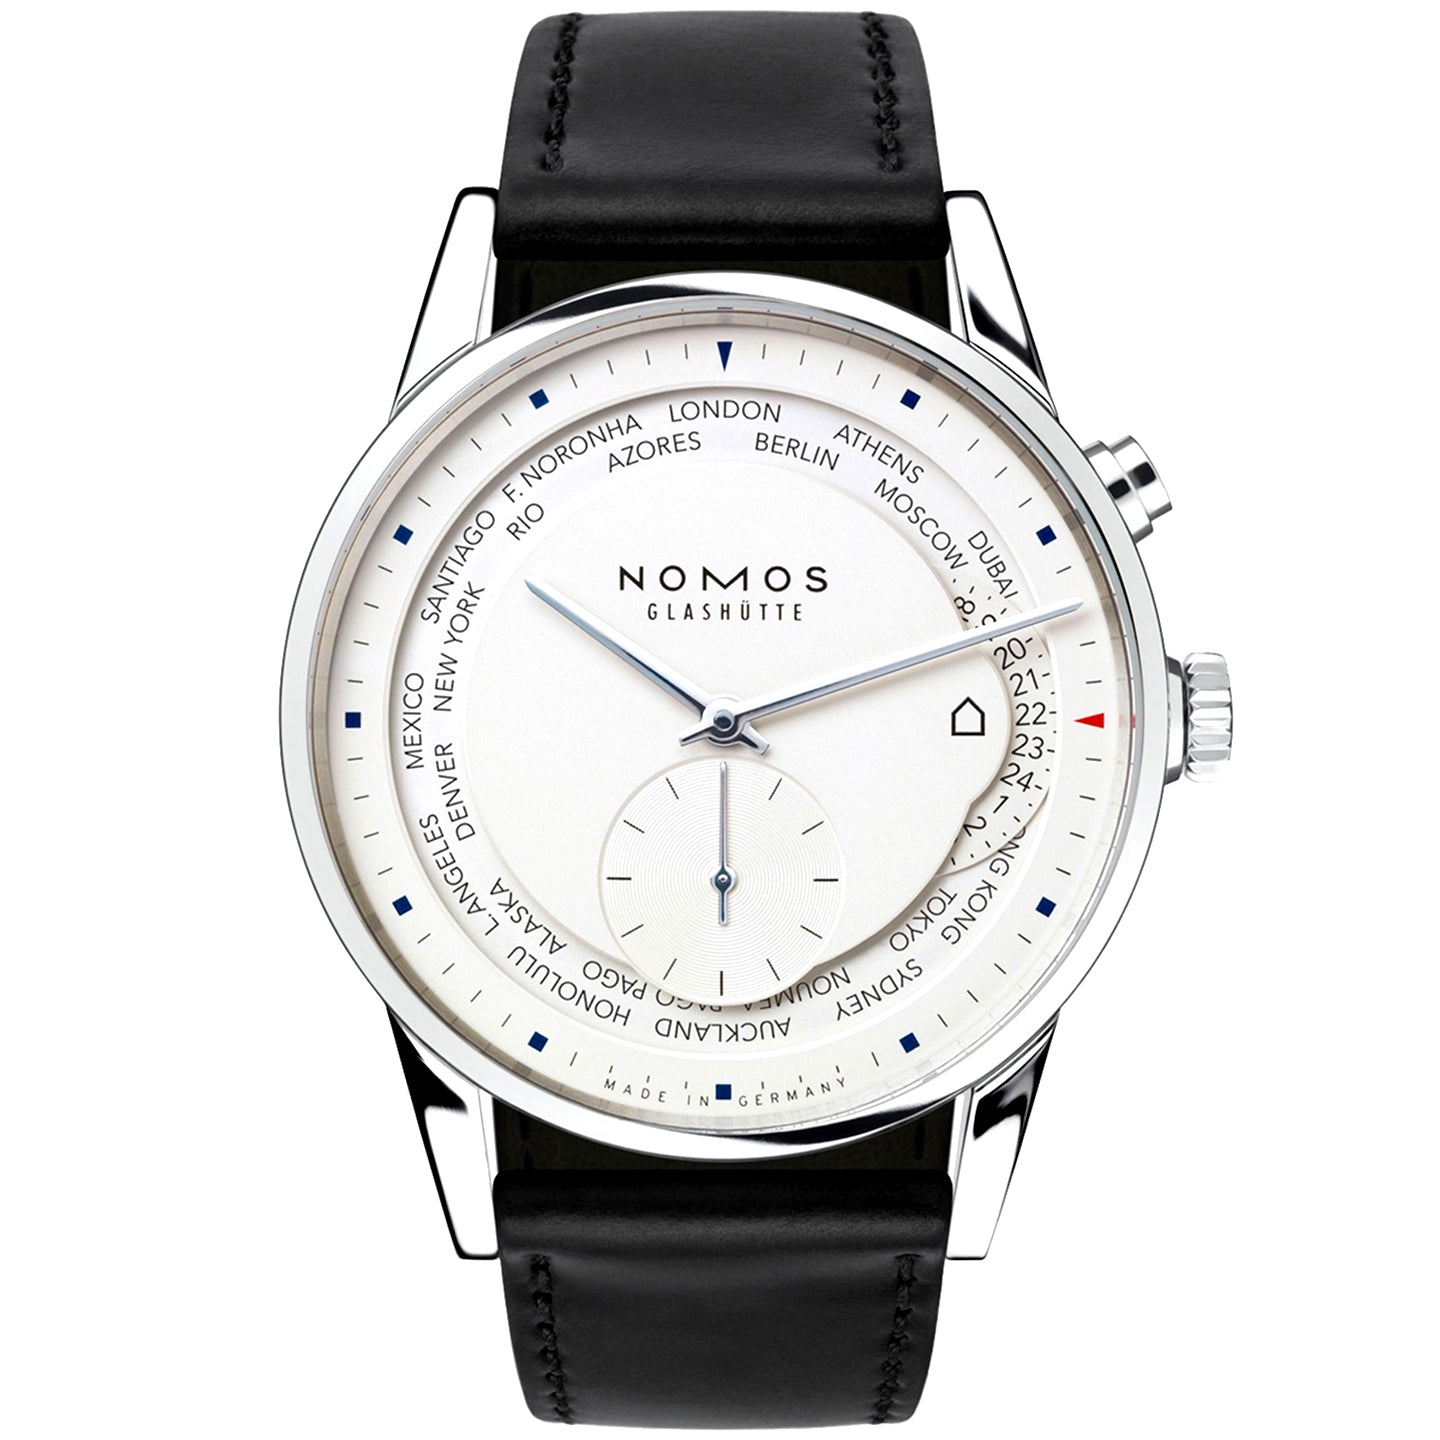 Zurich World Time 40mm White Dial Men's Automatic Watch